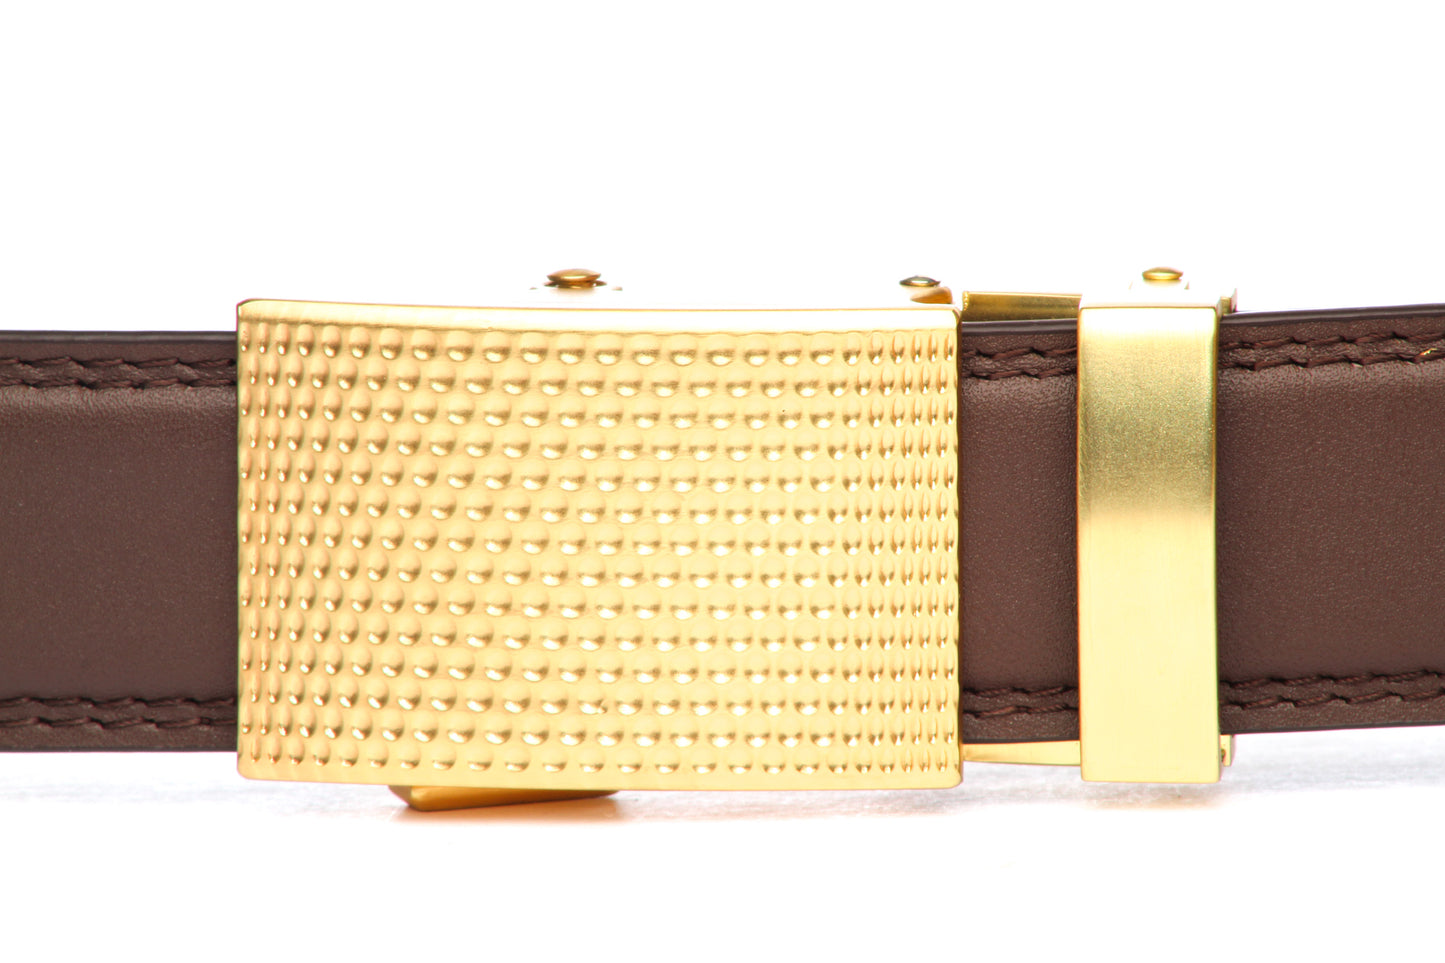 Men's golf ratchet belt buckle in gold with a 1.25-inch width, front view.